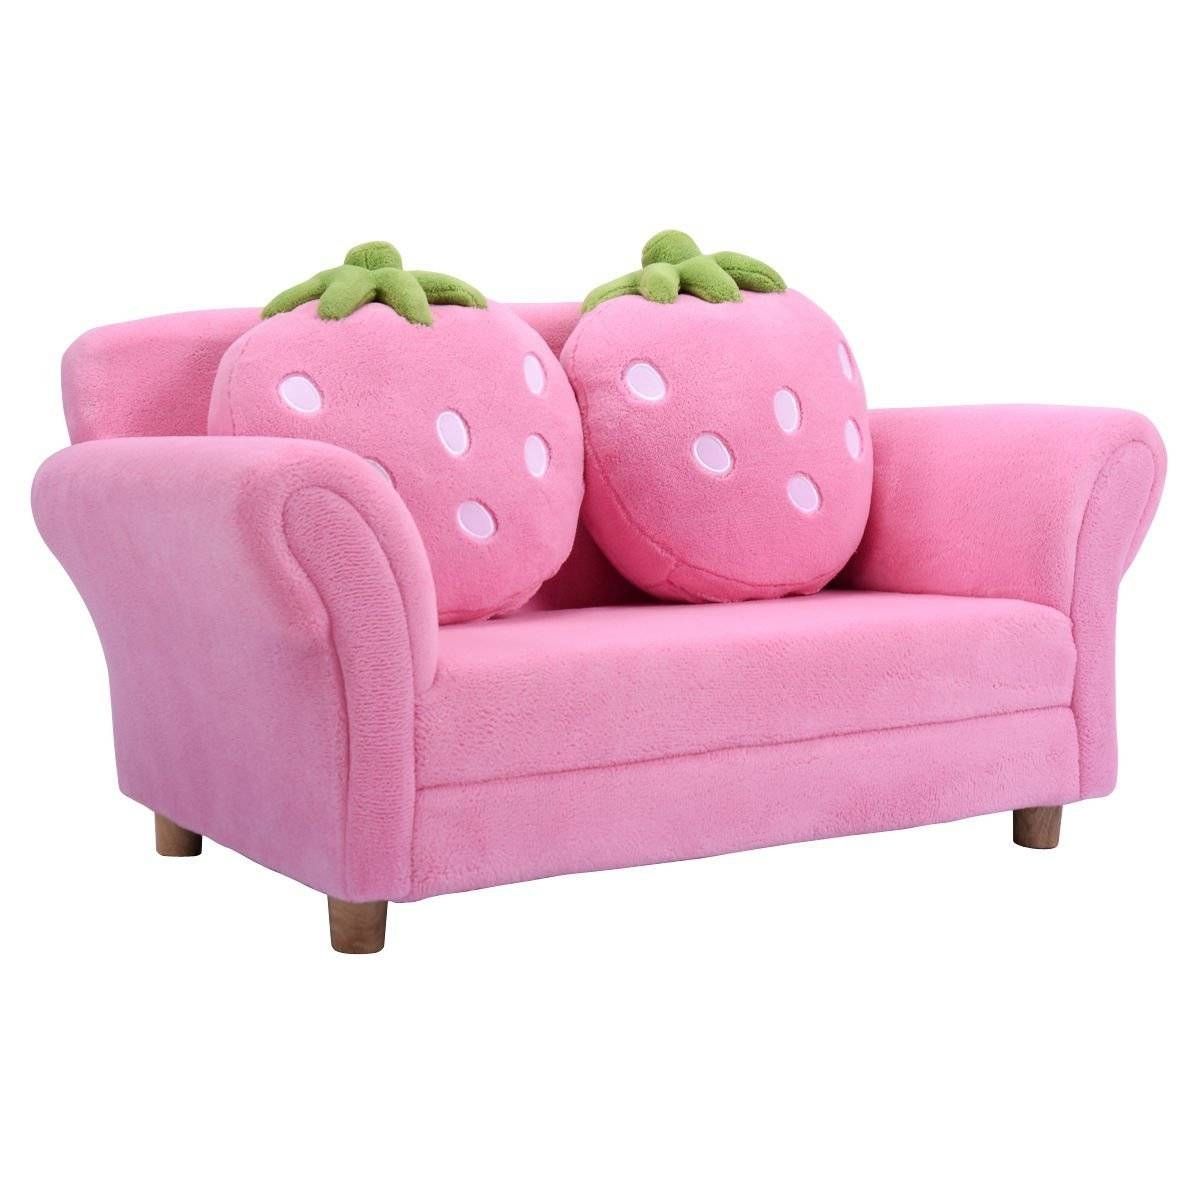 Sofas Center : Sofa Chair For Toddlers Toddler Kolino And Baby L Within Toddler Sofa Chairs (View 8 of 15)